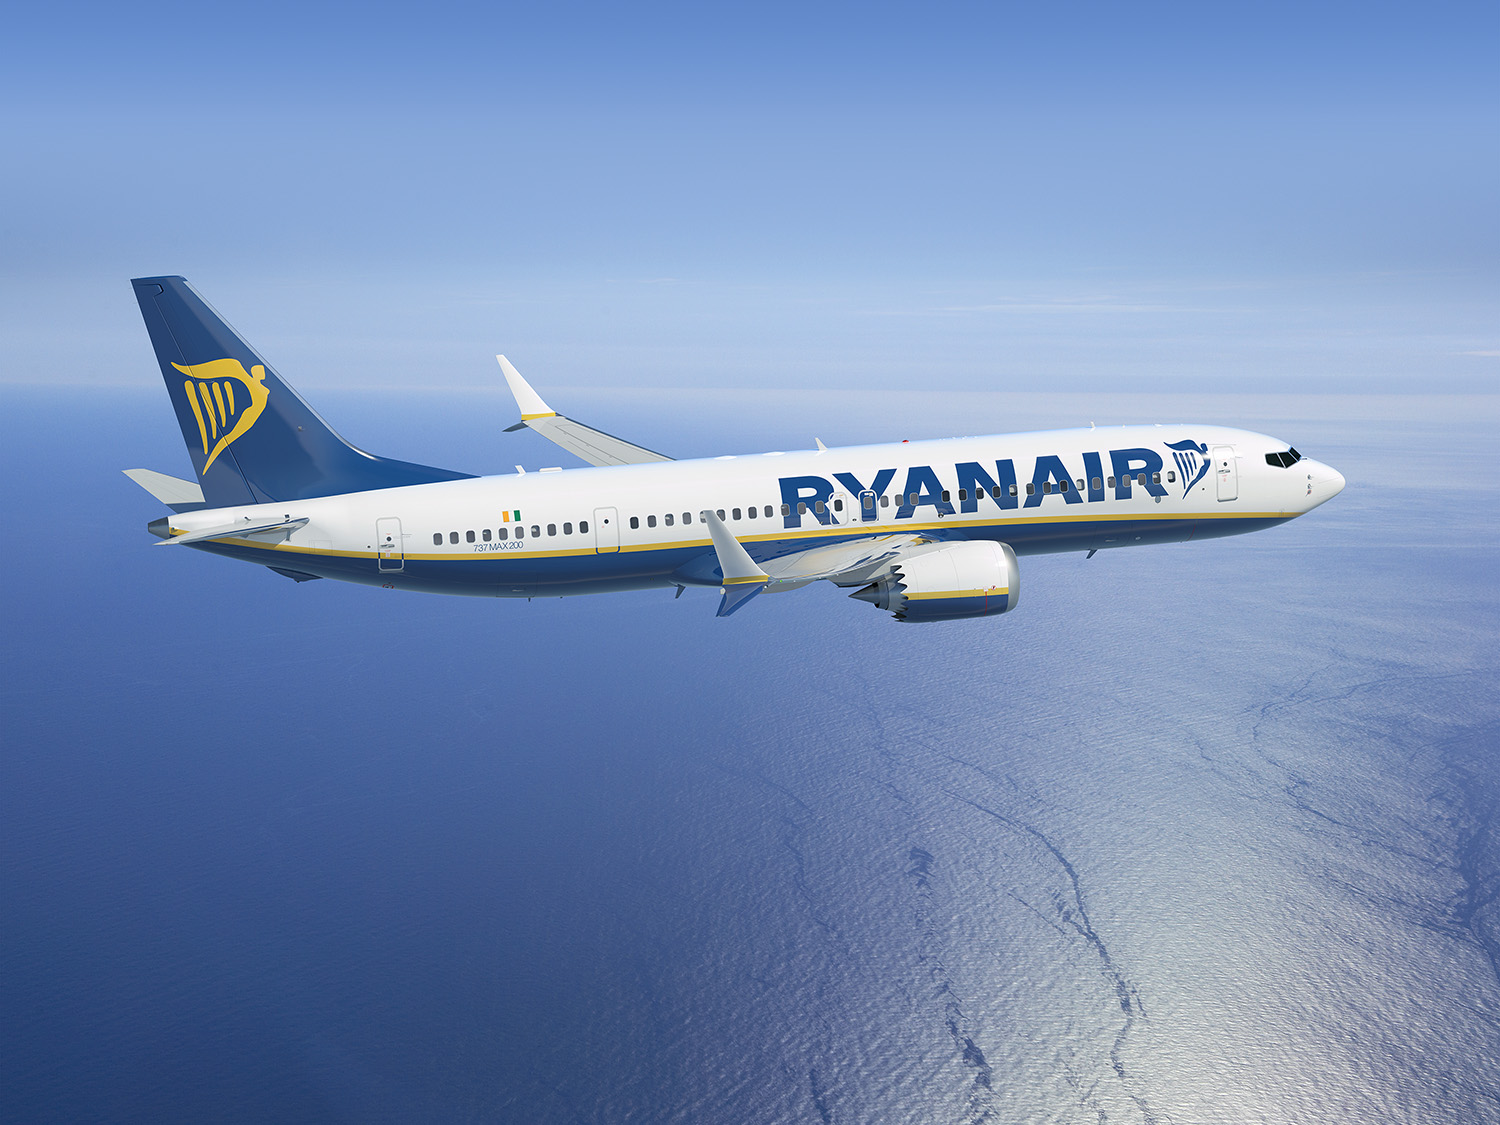 British people considered Ryanair the worst airline company